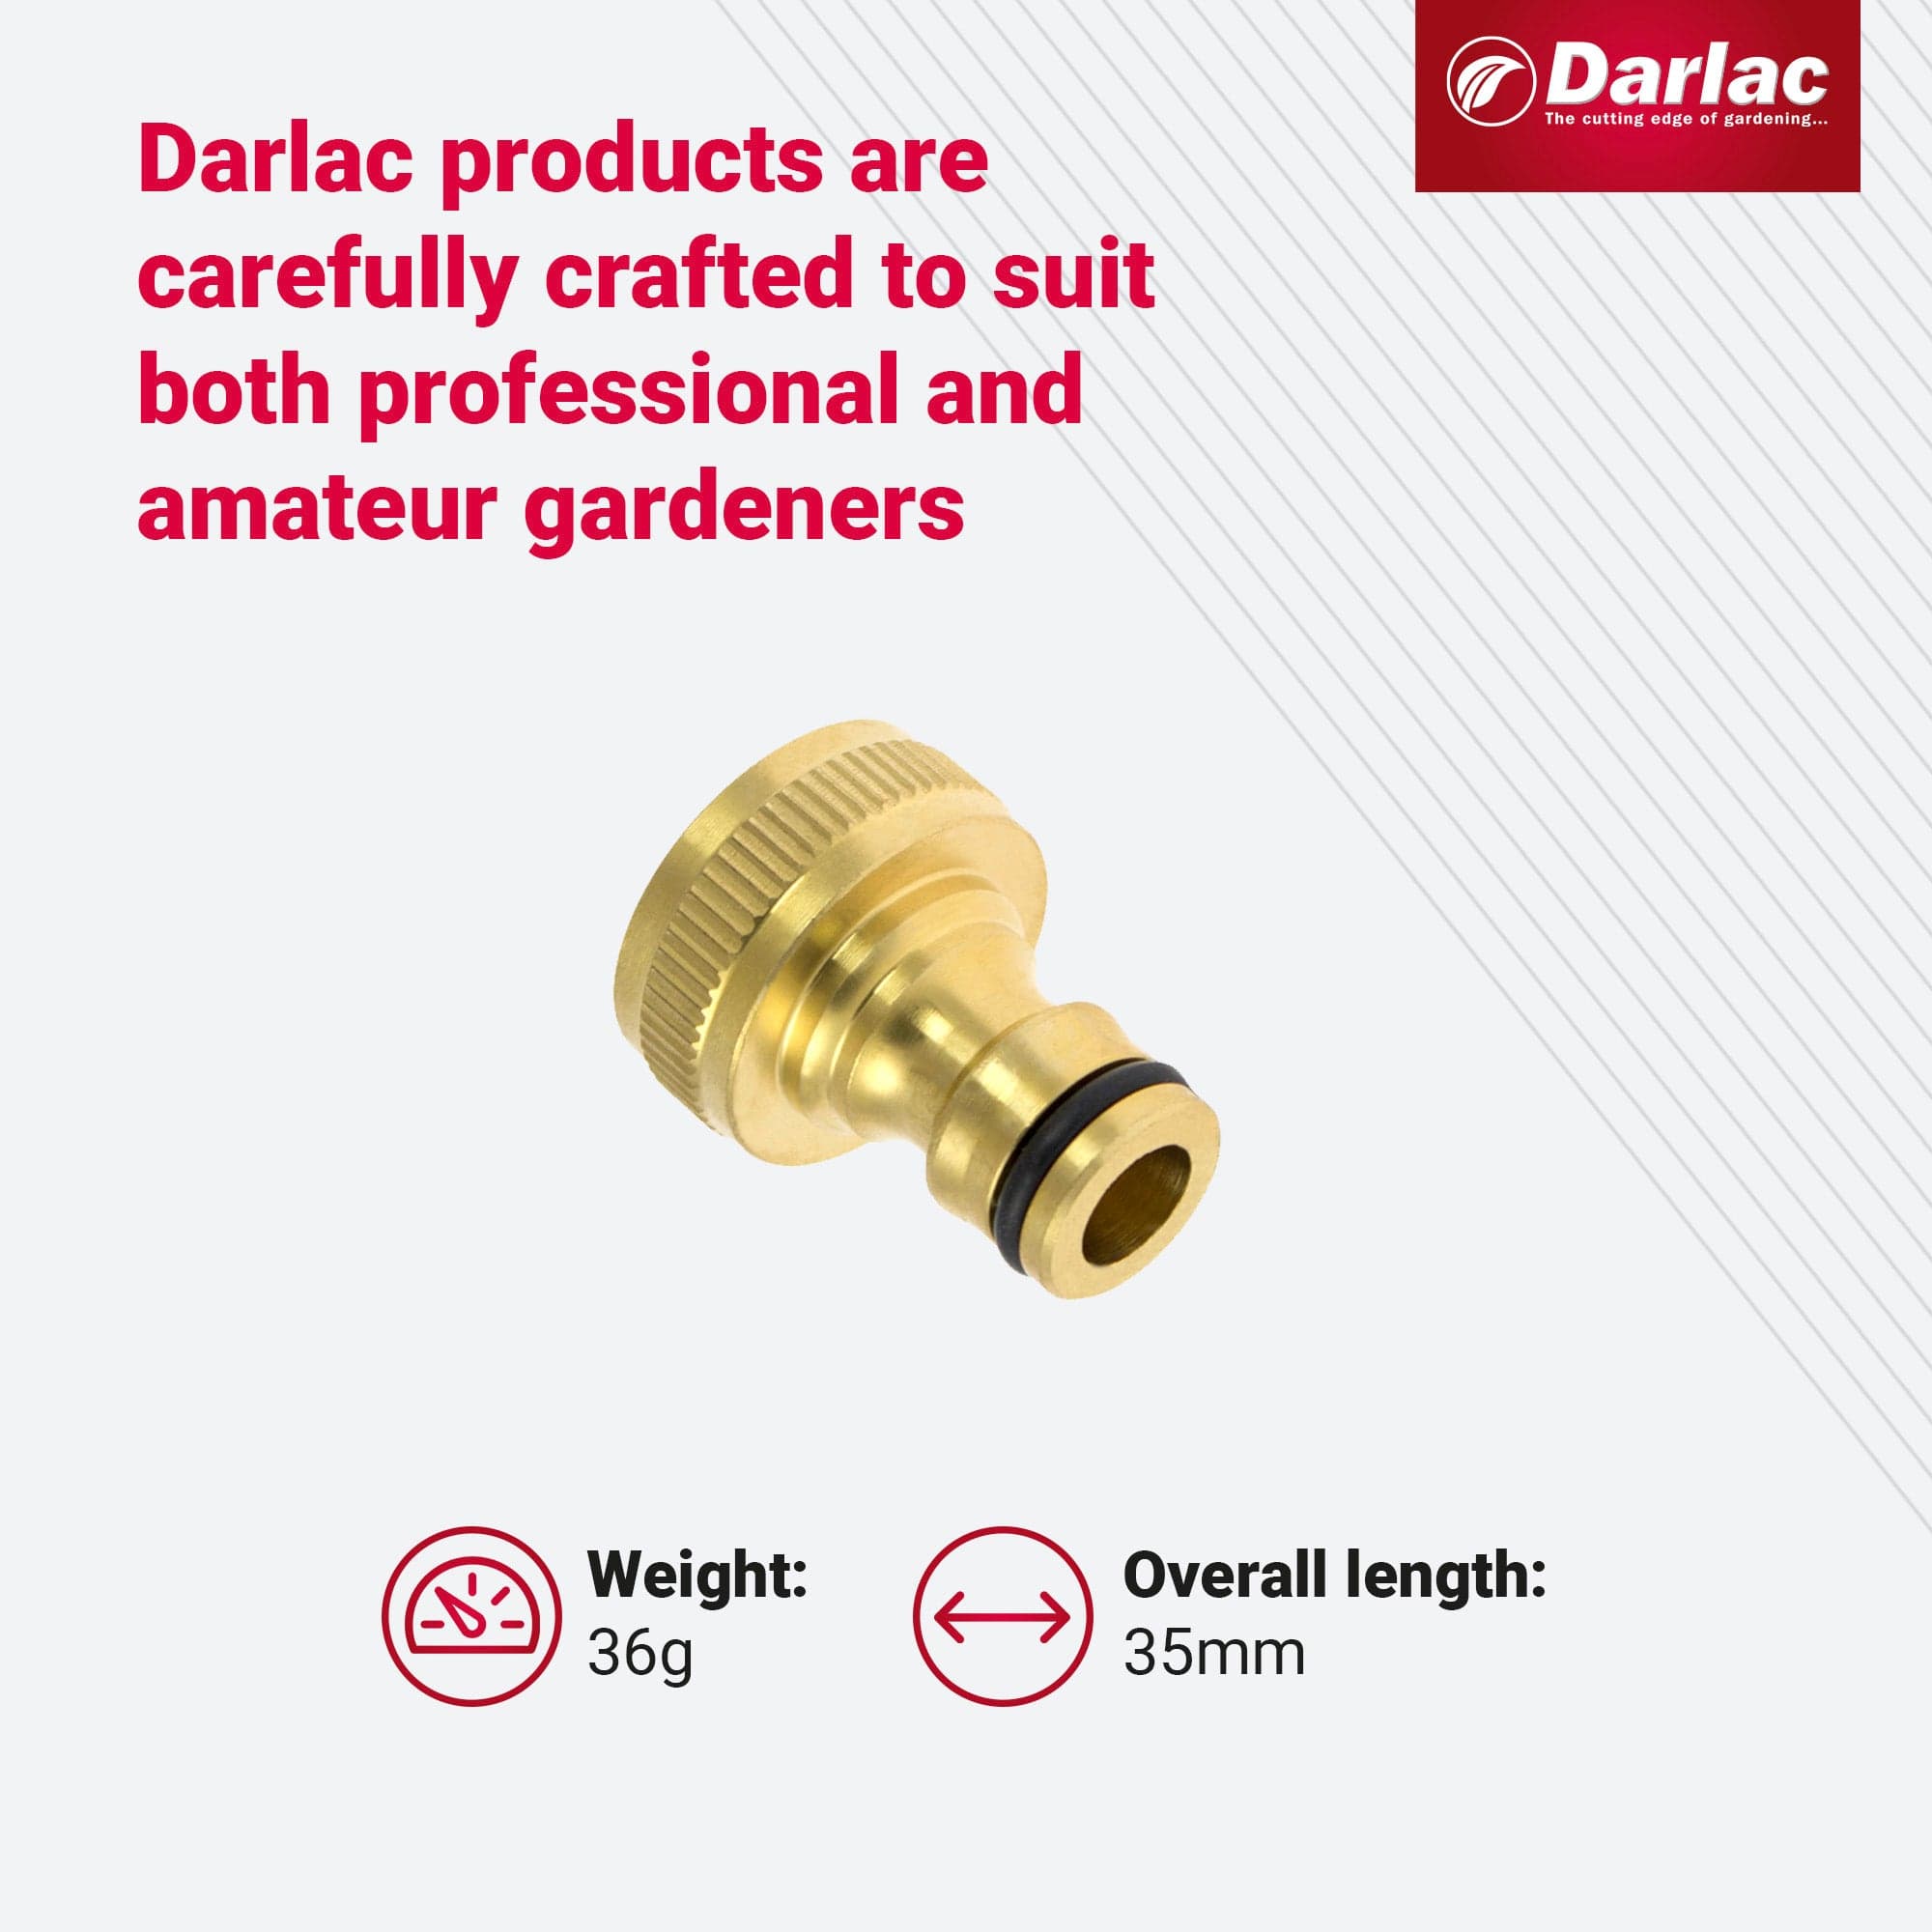 Darlac 3/4in BSP Tap Connector